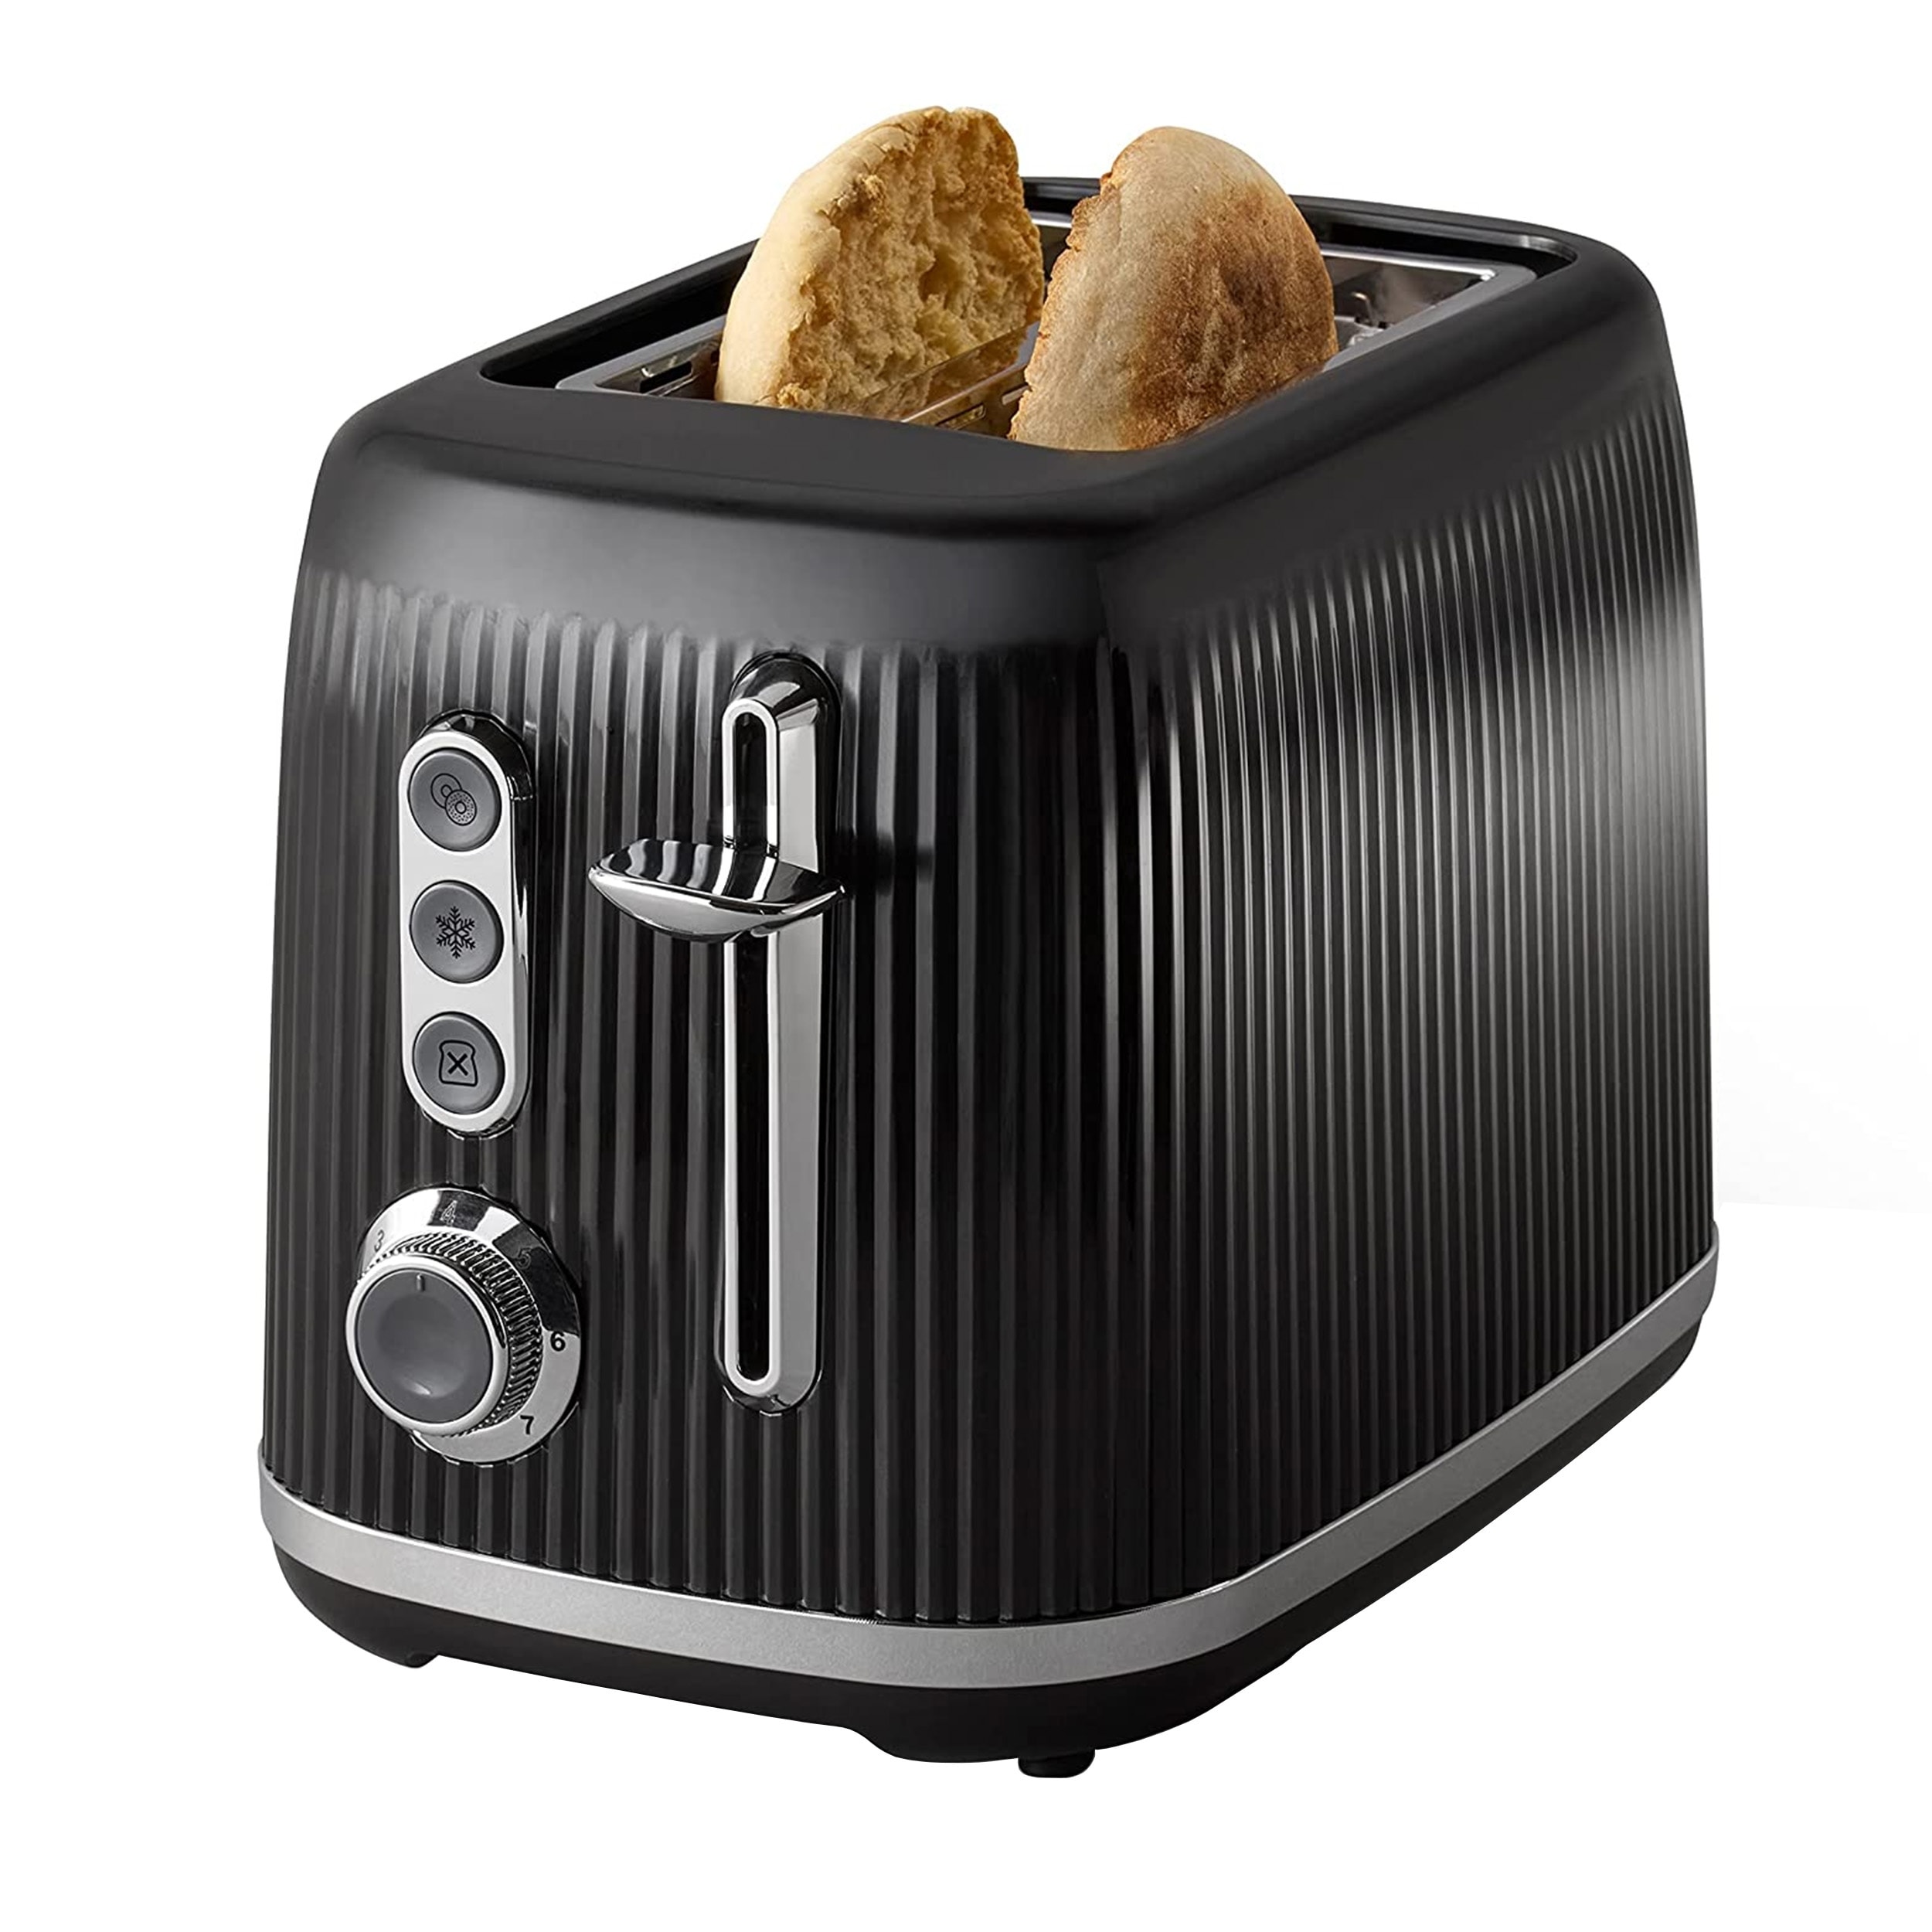 https://ak1.ostkcdn.com/images/products/is/images/direct/eb04aefea965dde557929bd97d17305929ad683d/Oster-Retro-2-Slice-Toaster-with-Extra-Wide-Slots-in-Black.jpg